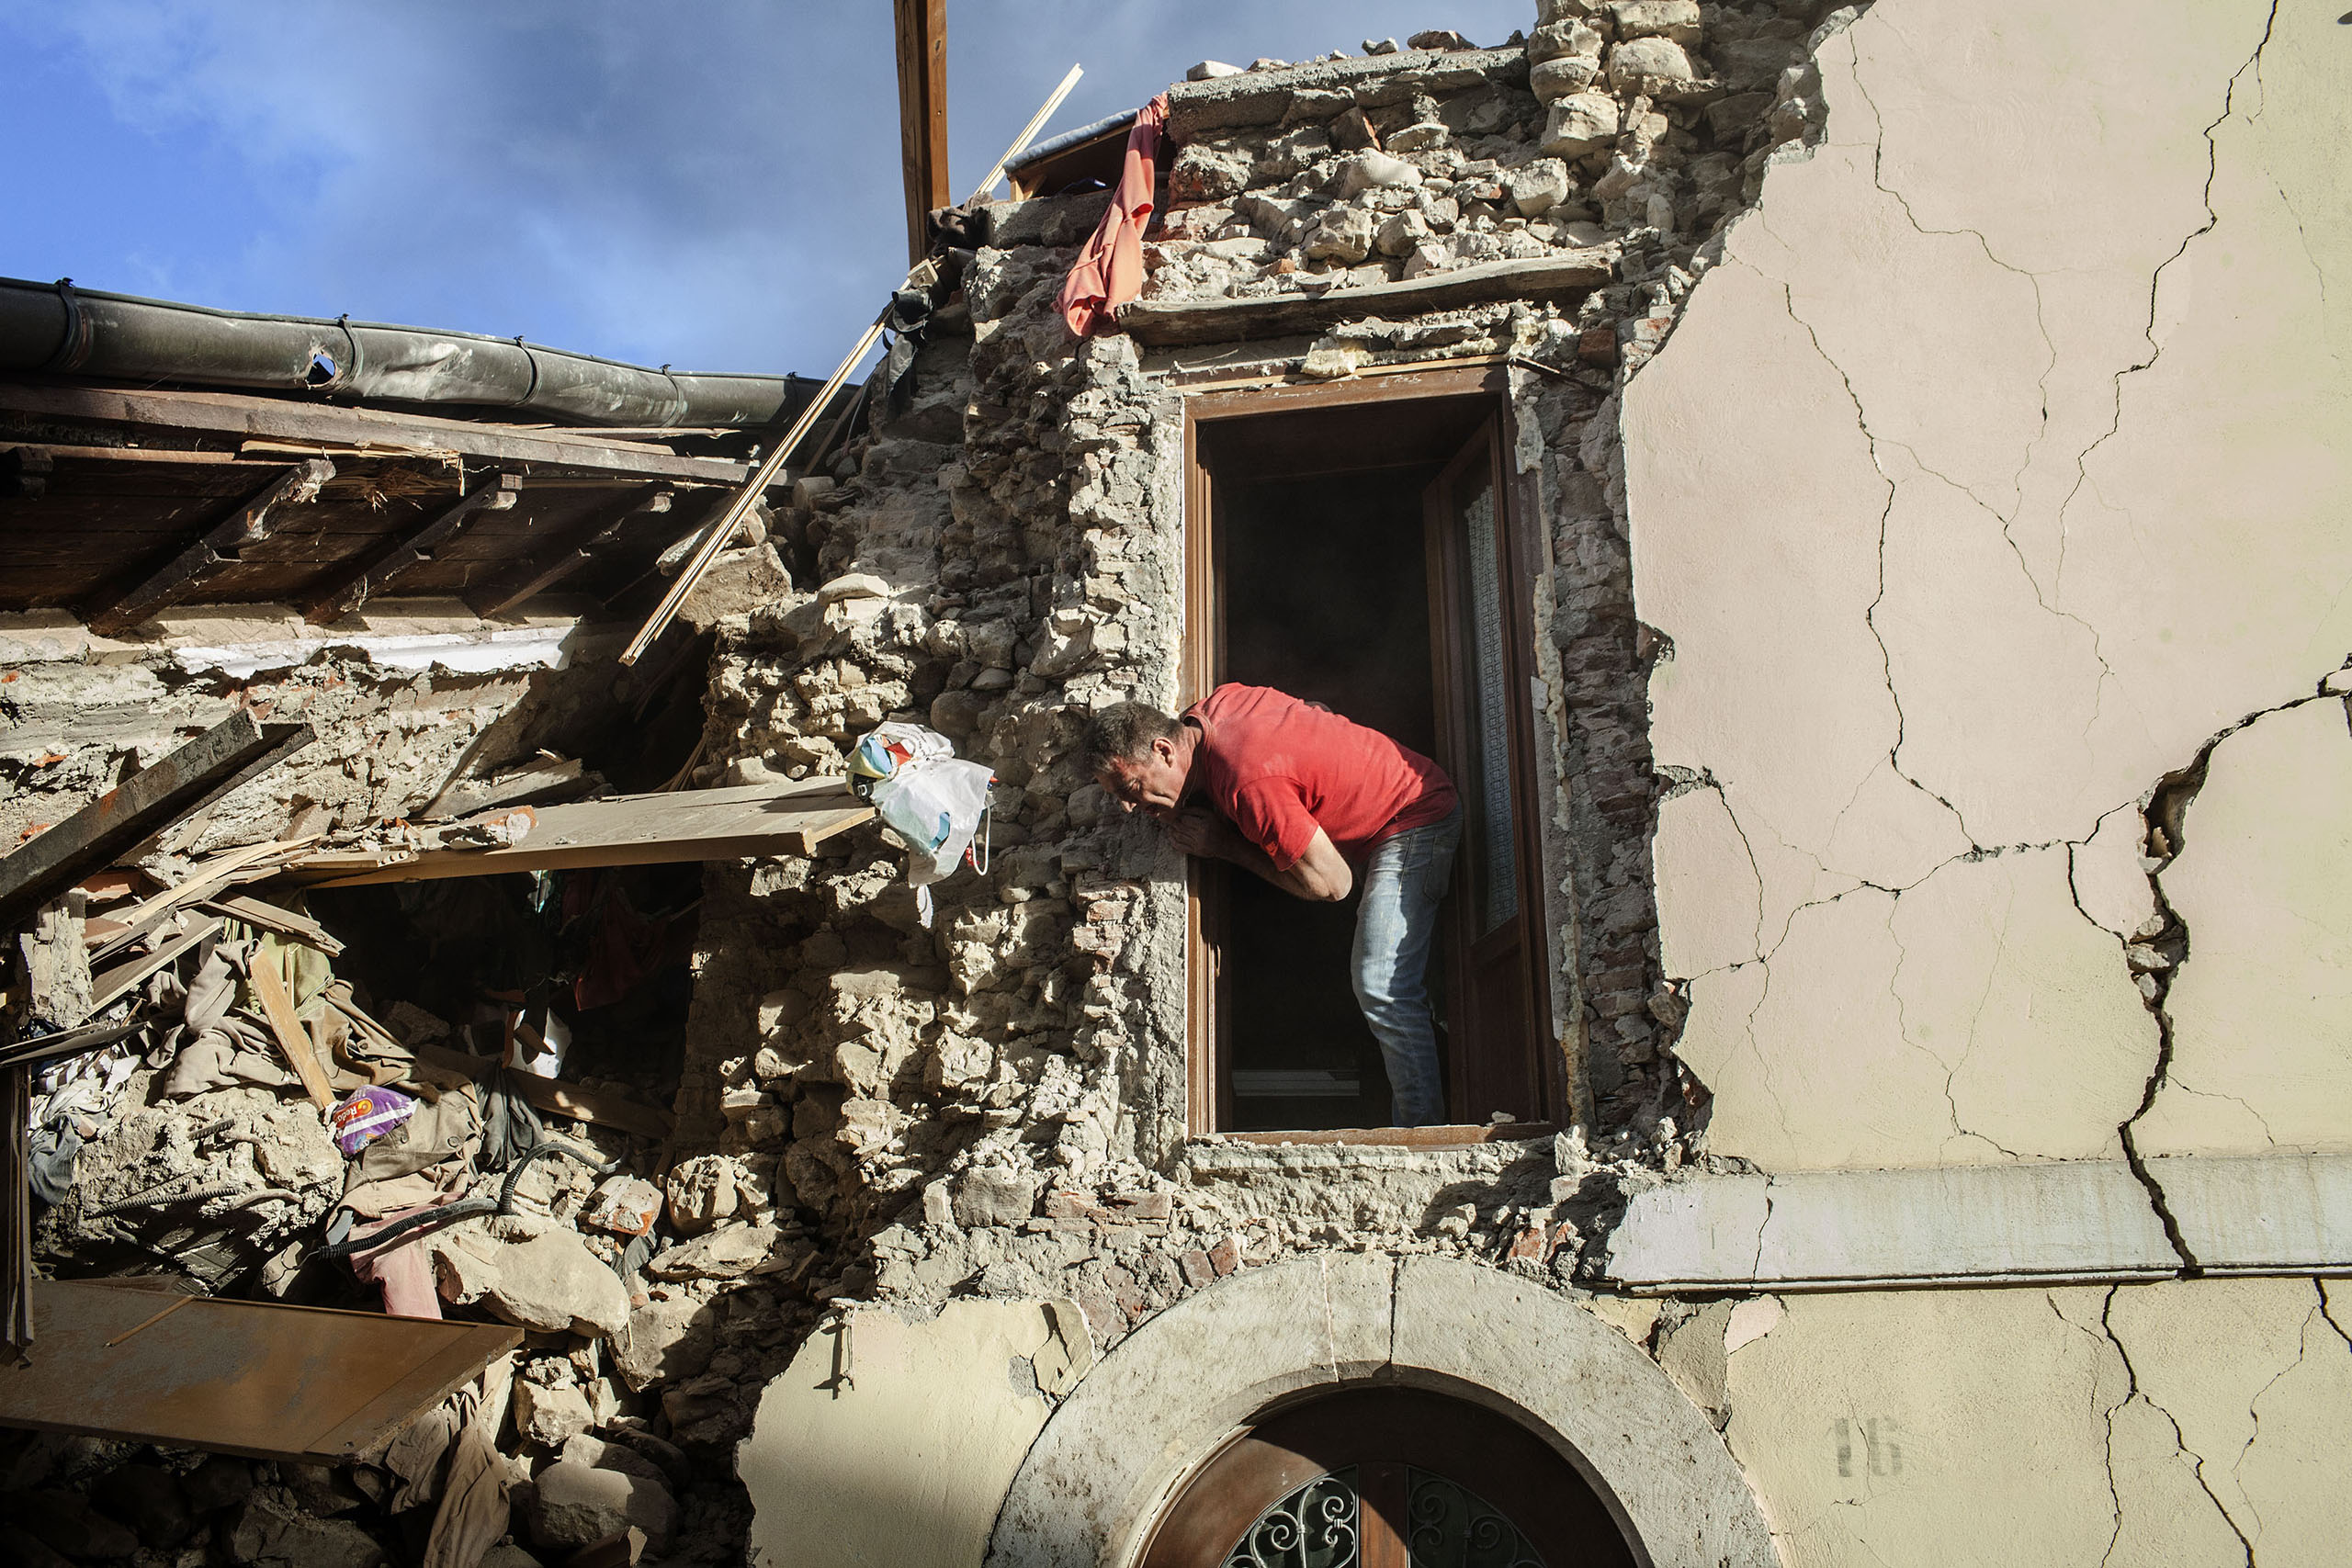 A man searches  for survivors in a house destroyed by the earthquake in Amatrice, Italy, on Aug. 24, 2016.